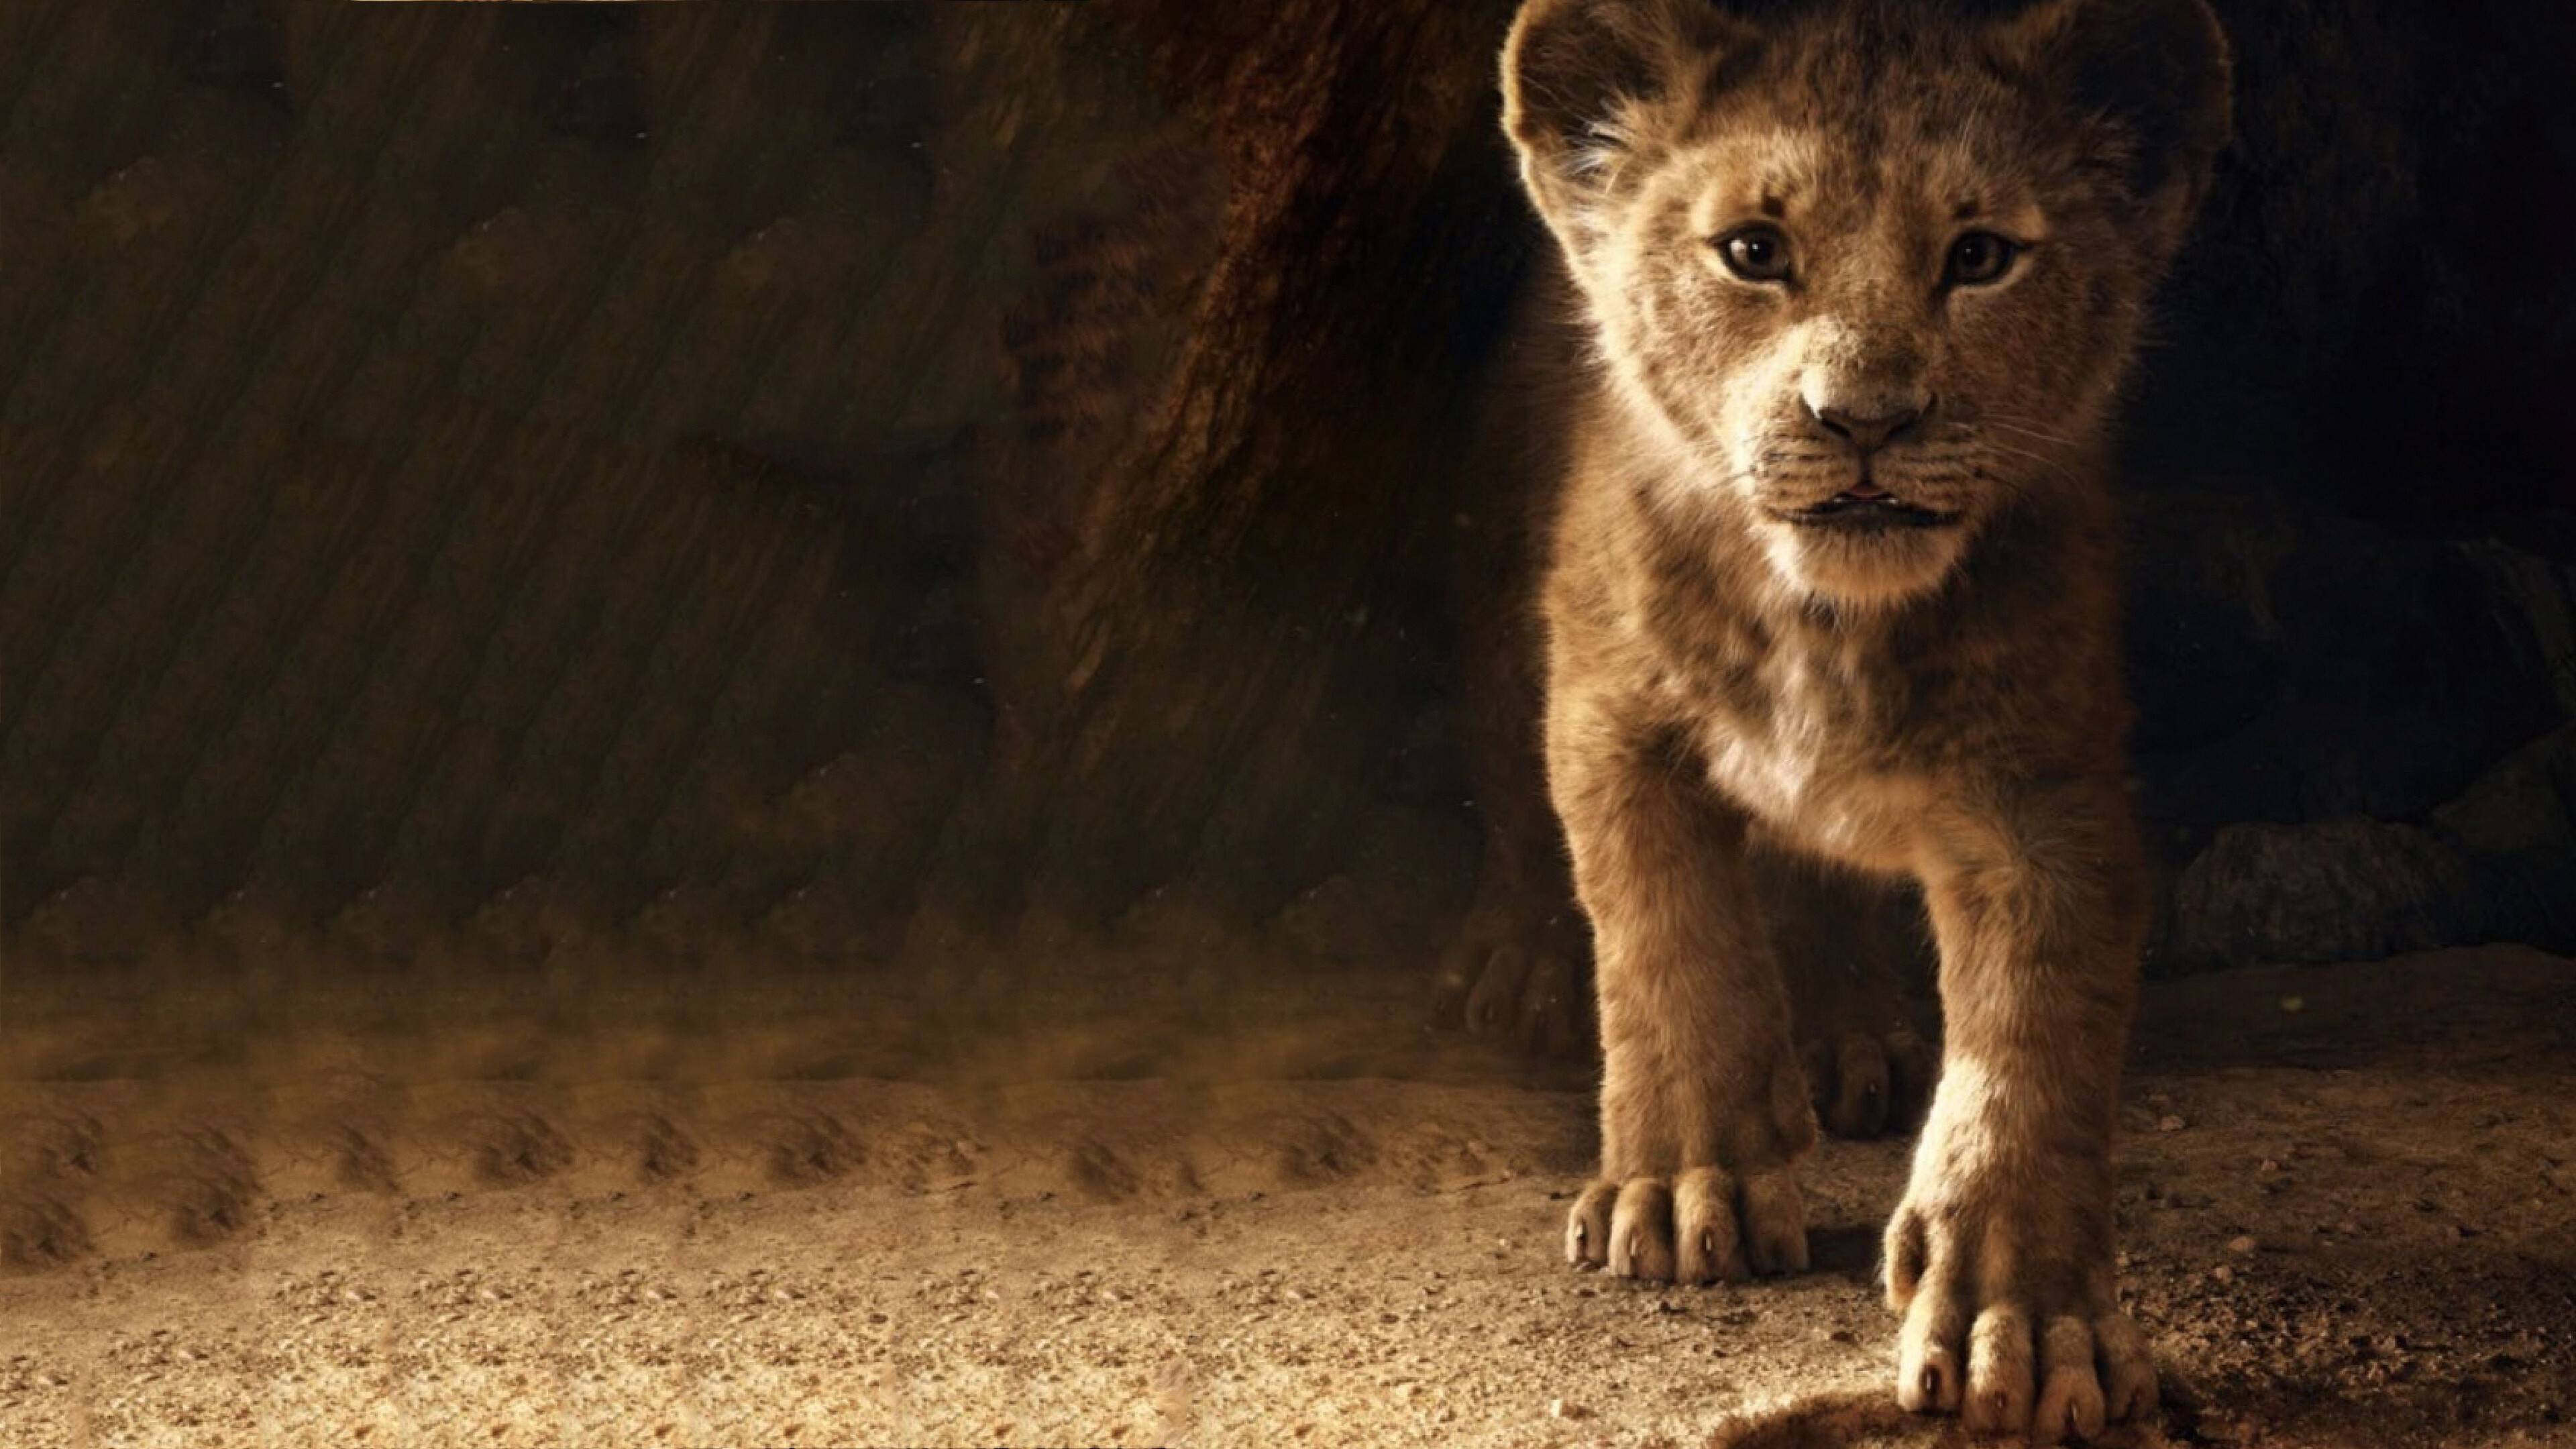 The Lion King: A 1994 American animated film, Set in a kingdom of lions in Africa. 3840x2160 4K Wallpaper.